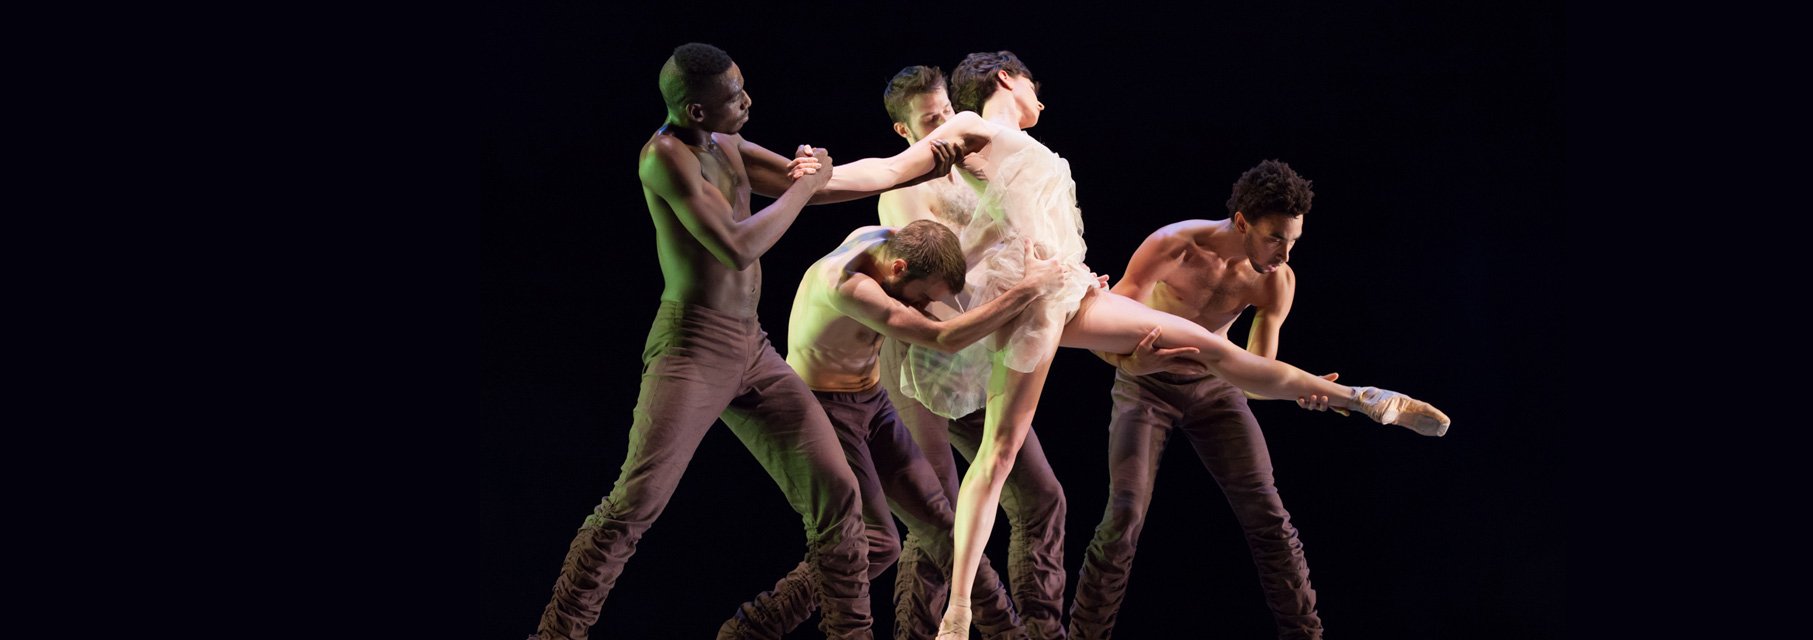 LINES Ballet company artists on stage performing in Alonzo King's WRITING GROUND